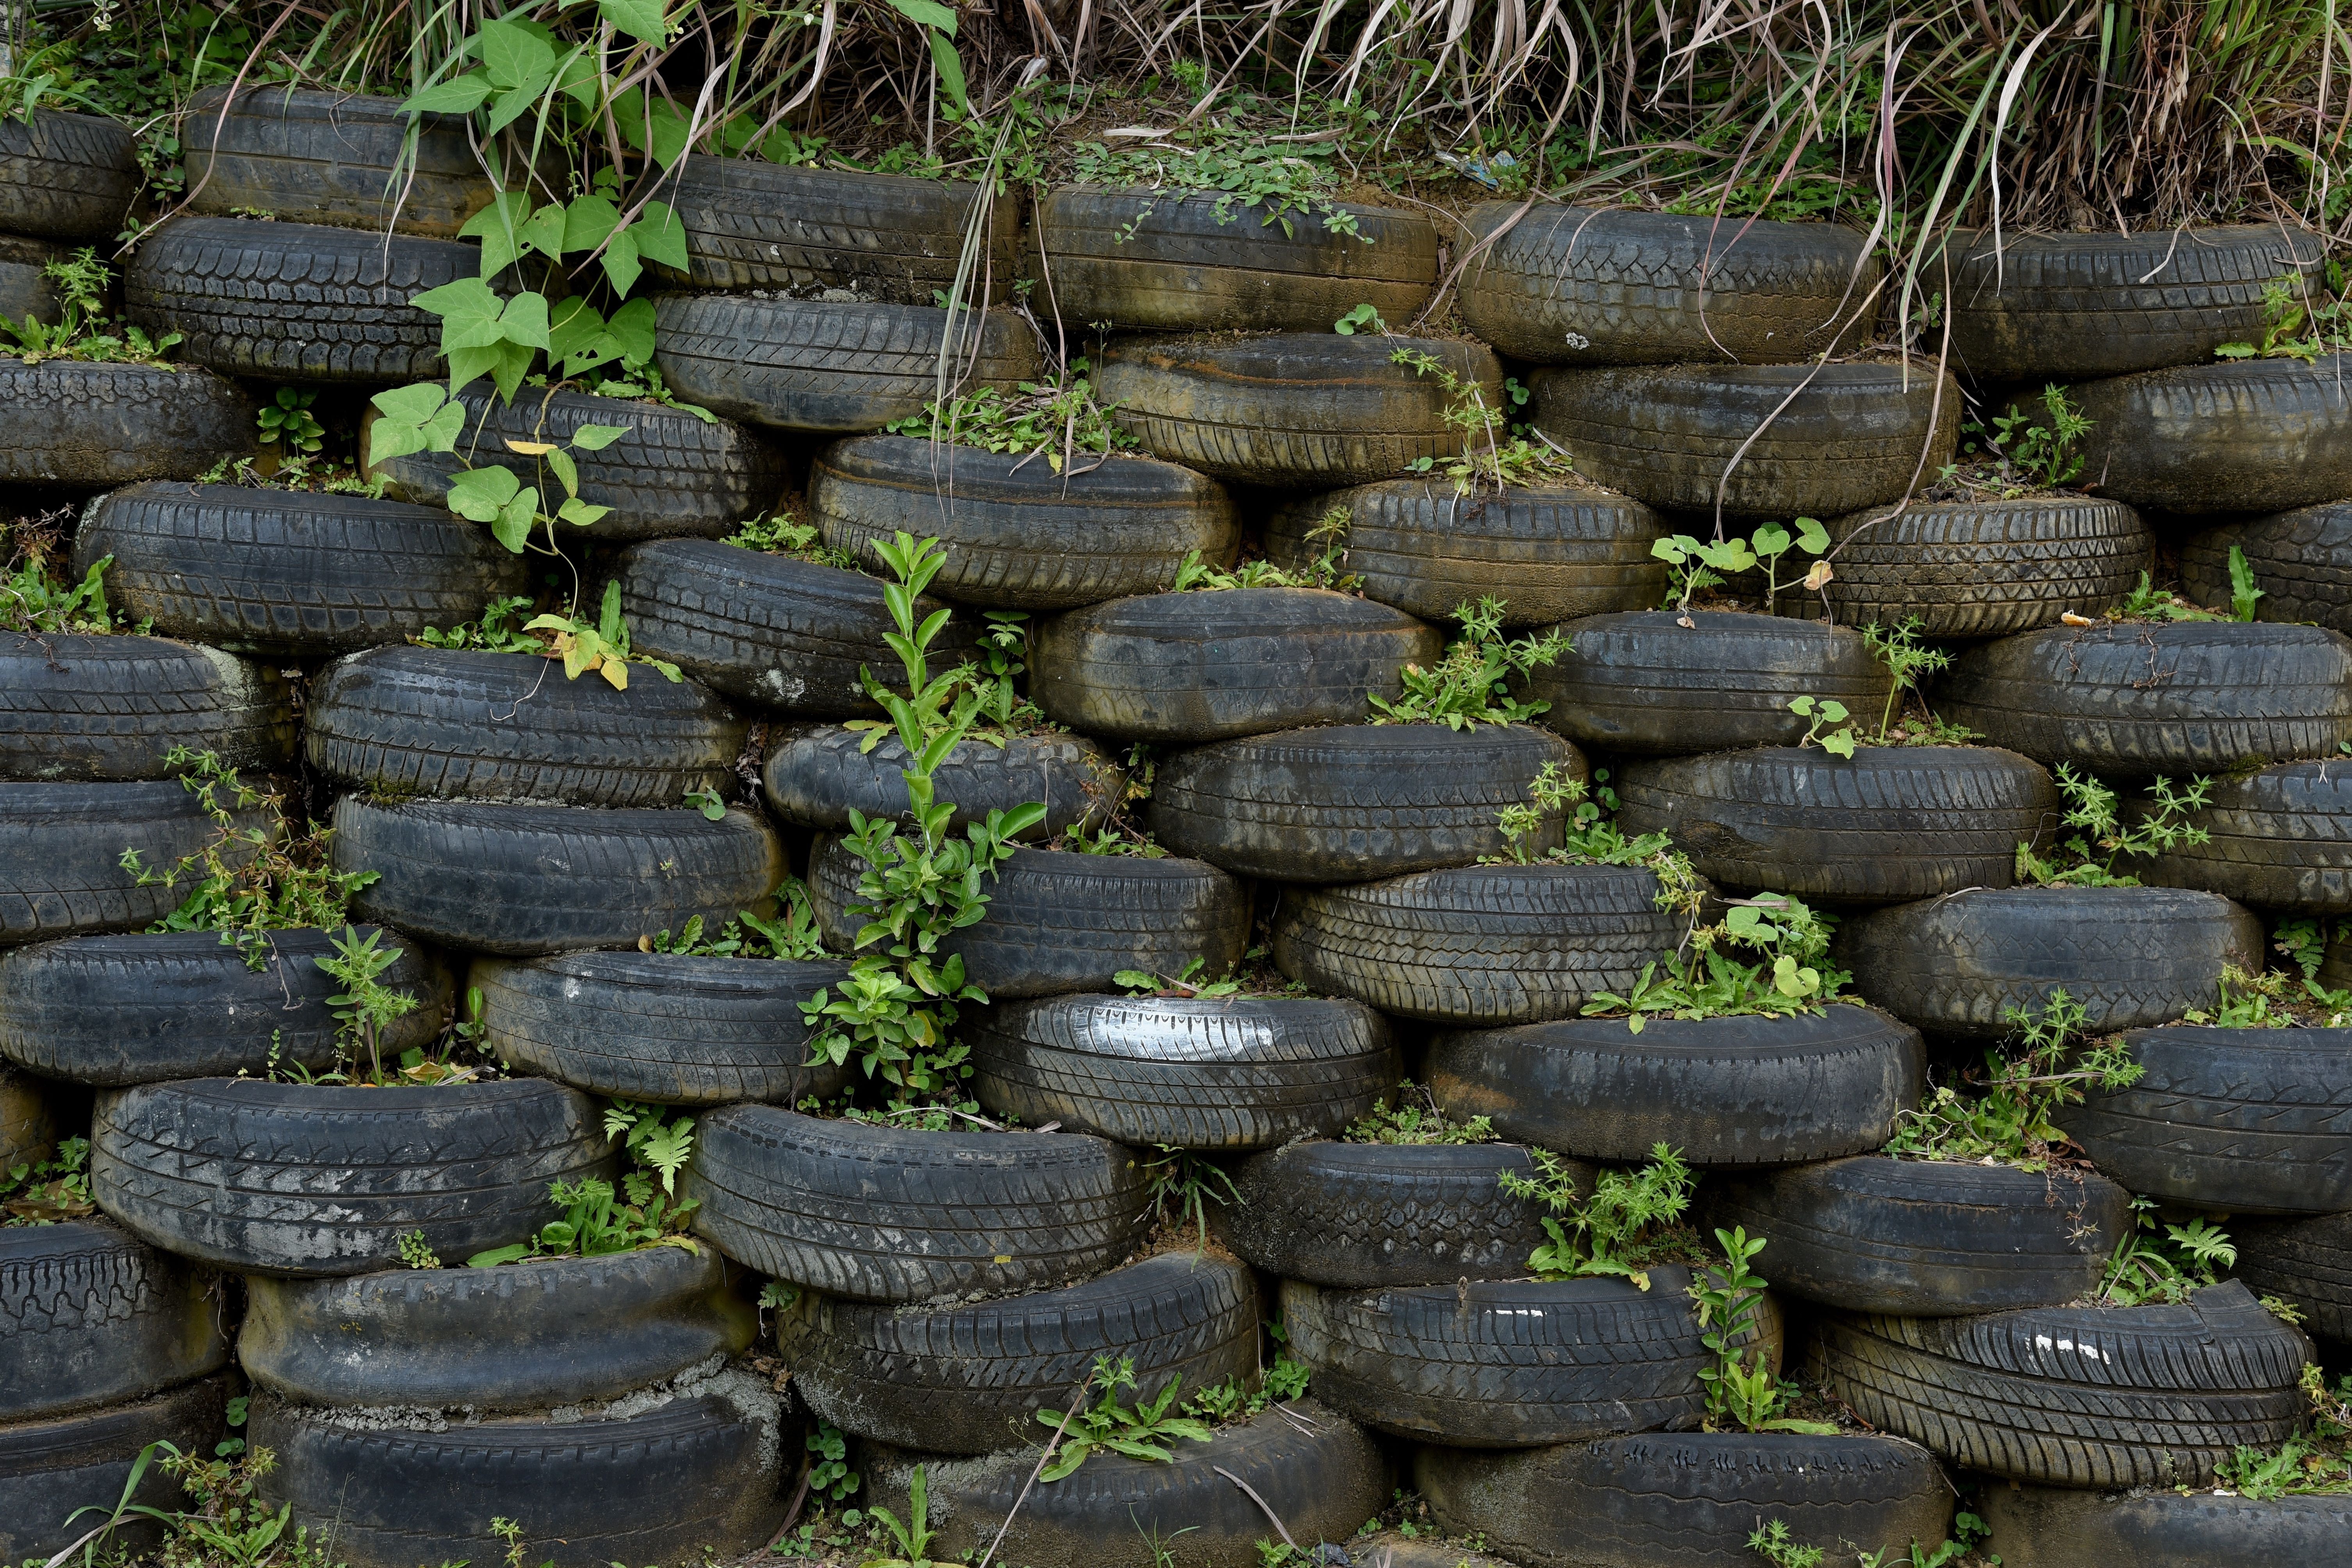 Pile tires used for natural disaster retaining walls, natural resource conservation. dying planet, earth day, graphic resource.